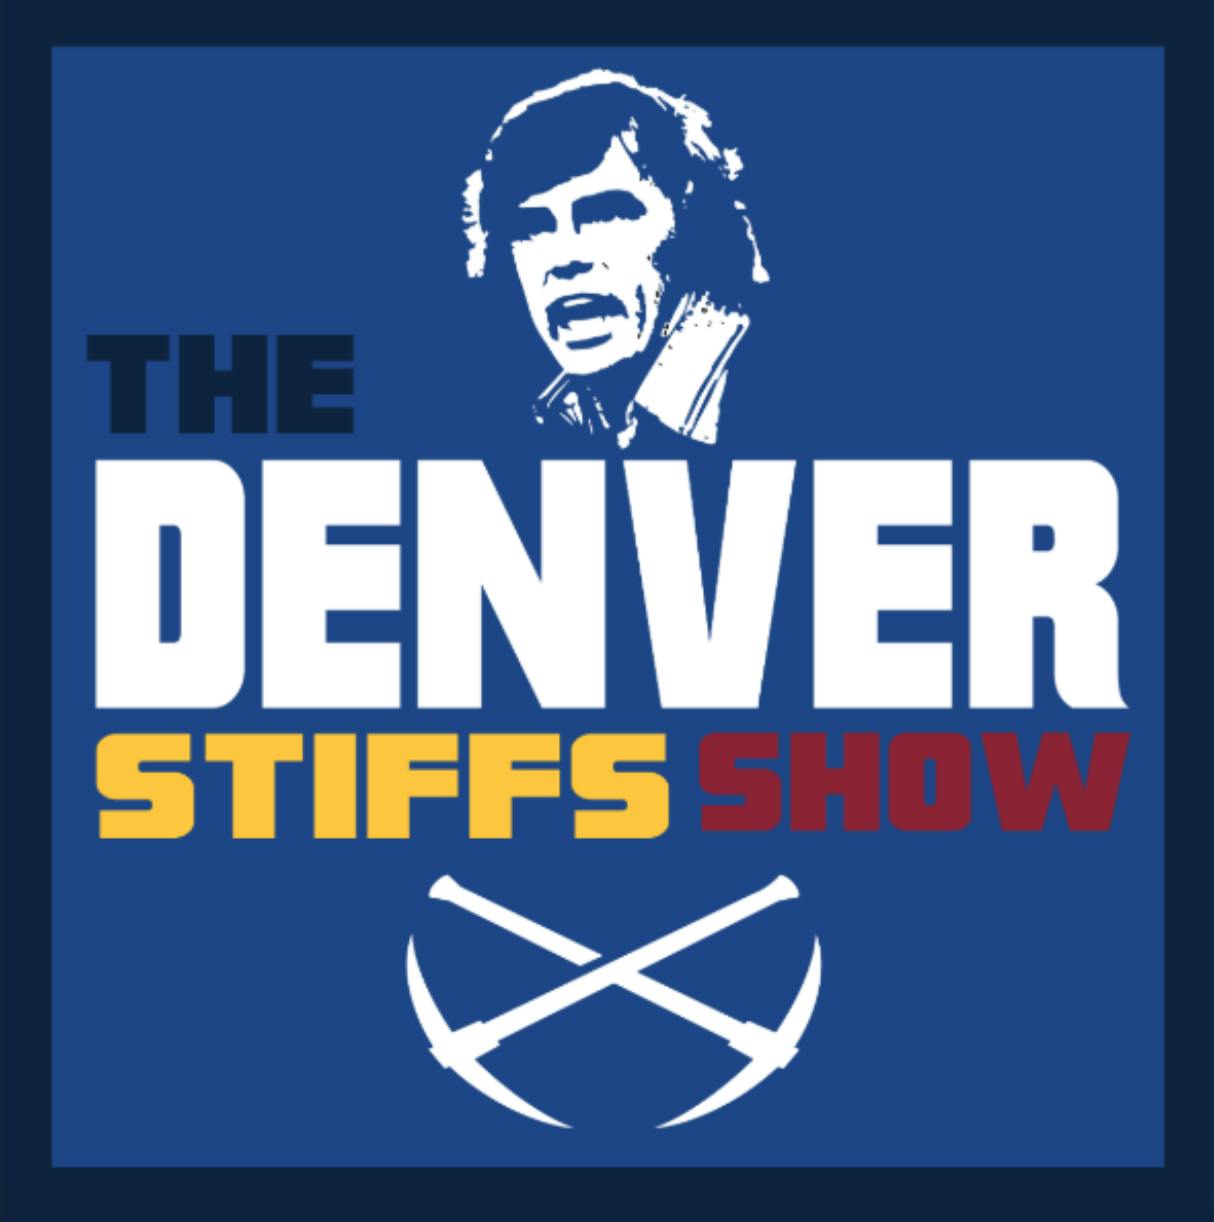 NBA Schedule drops, Will Barton's comments, and who's going to play? | The Denver Stiffs Show